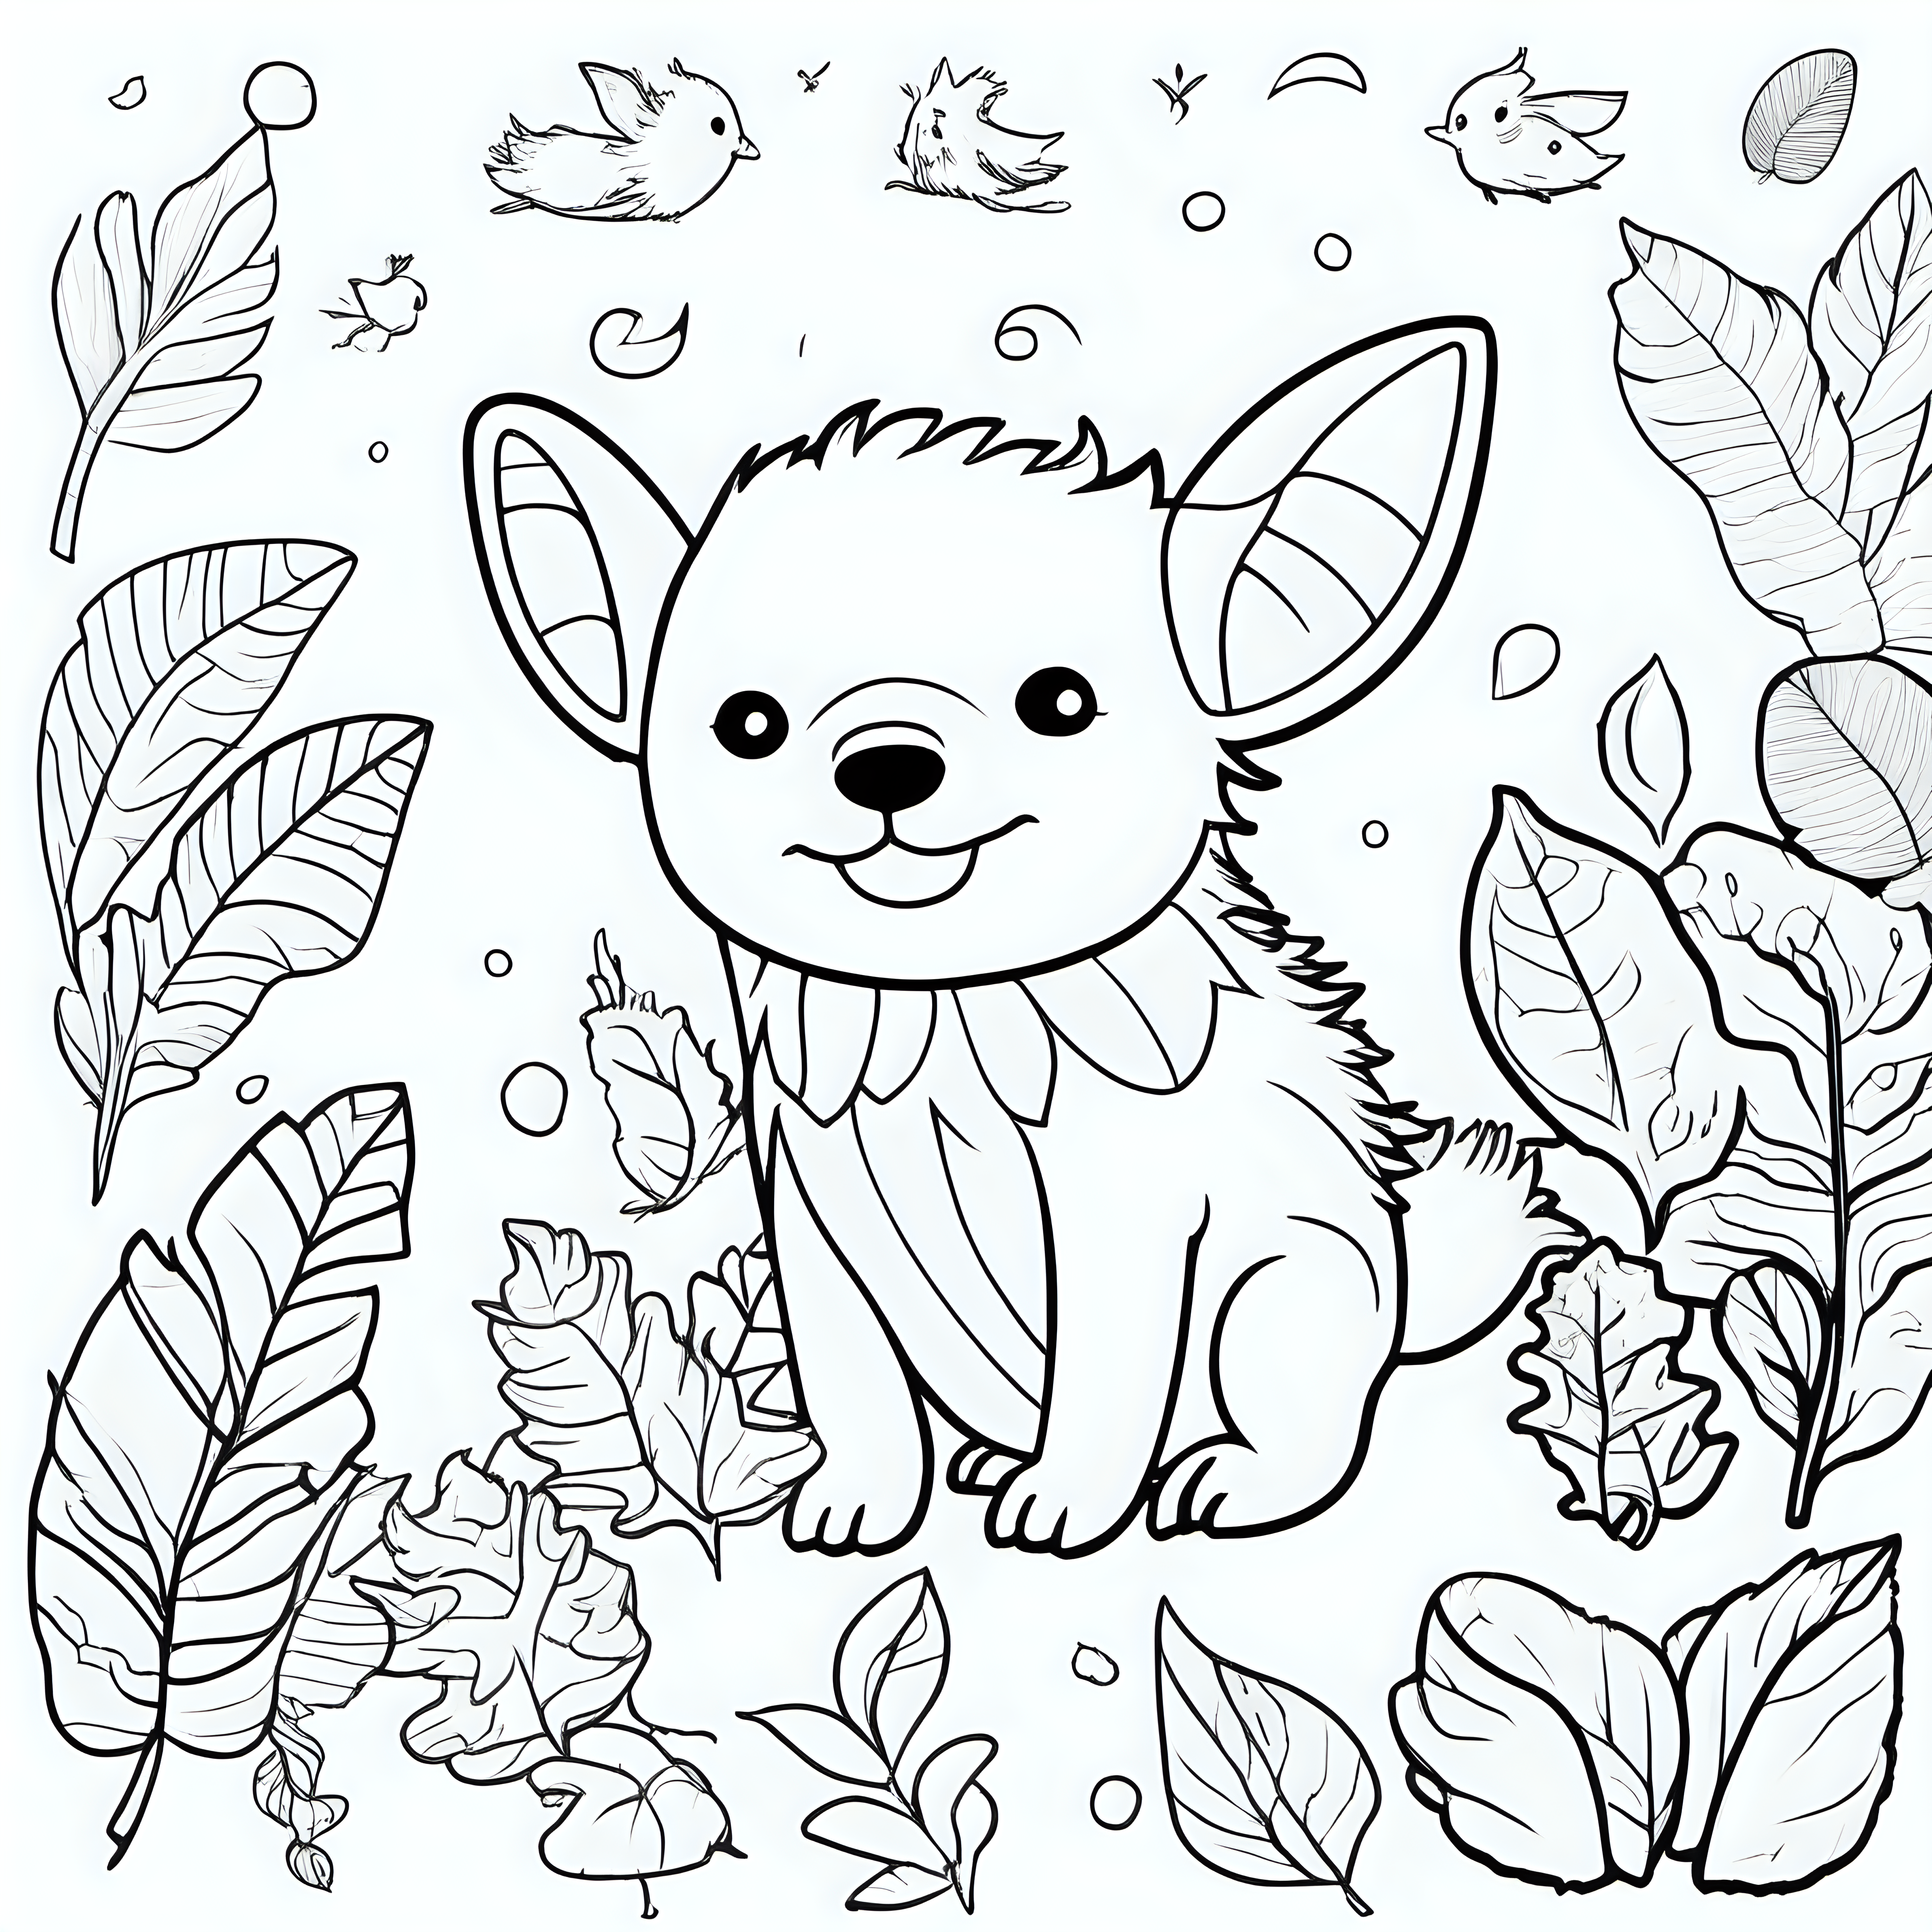 draw a colorful book cover for a coloring book for kids with cute animals on it like dogs, 
Axolotl, birds, sloth etc with some leafs and write Cute Animals Coloring Book for Kids